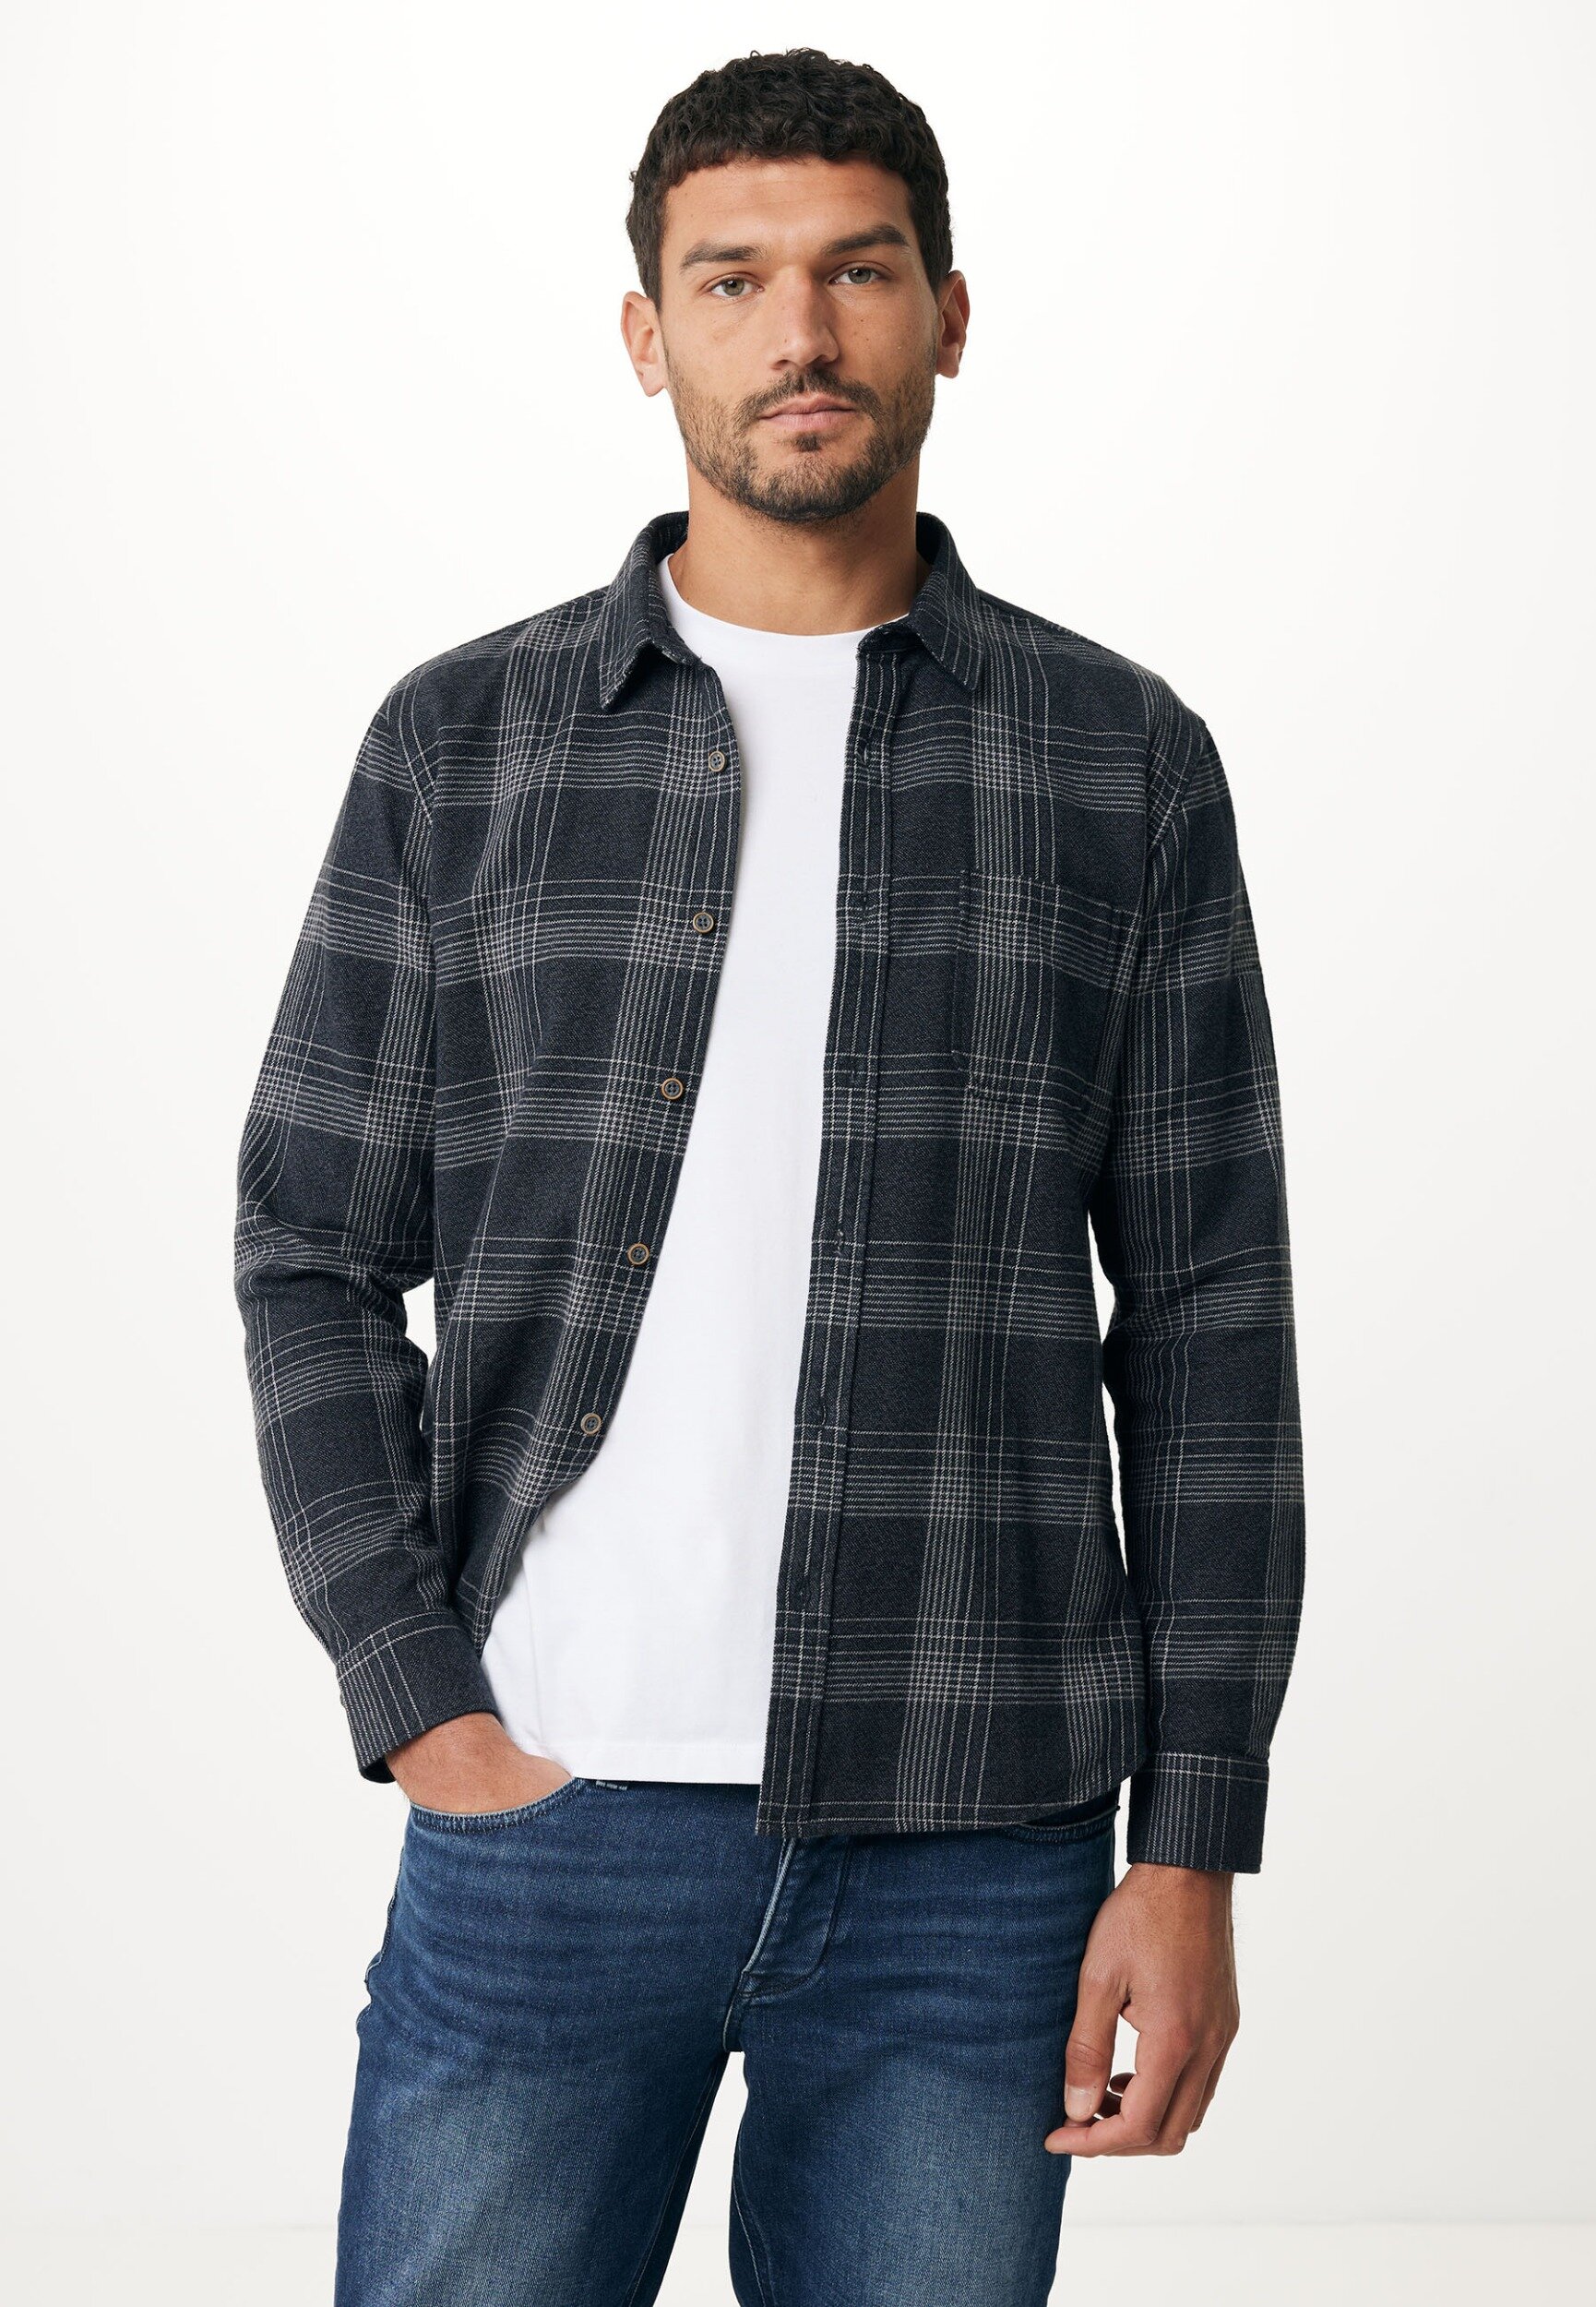 Mexx Lange Mouwen Flanel Check Overshirt With Pocket Mannen - Anthracite Melee - Maat XL